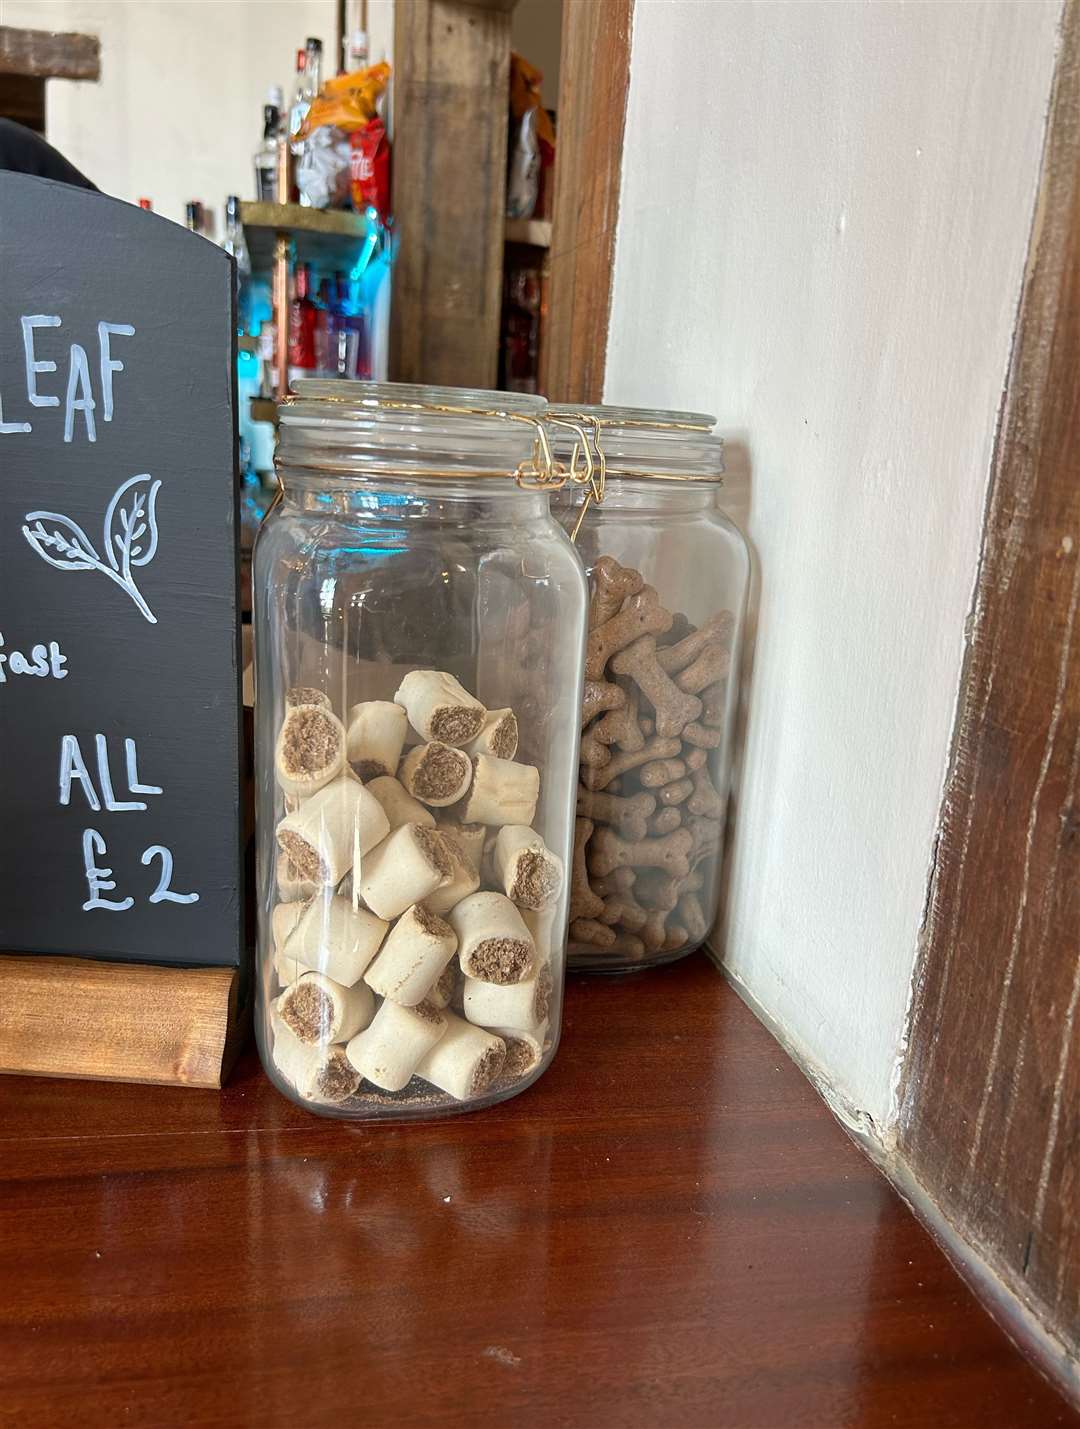 Dog treats are on offer at the pub